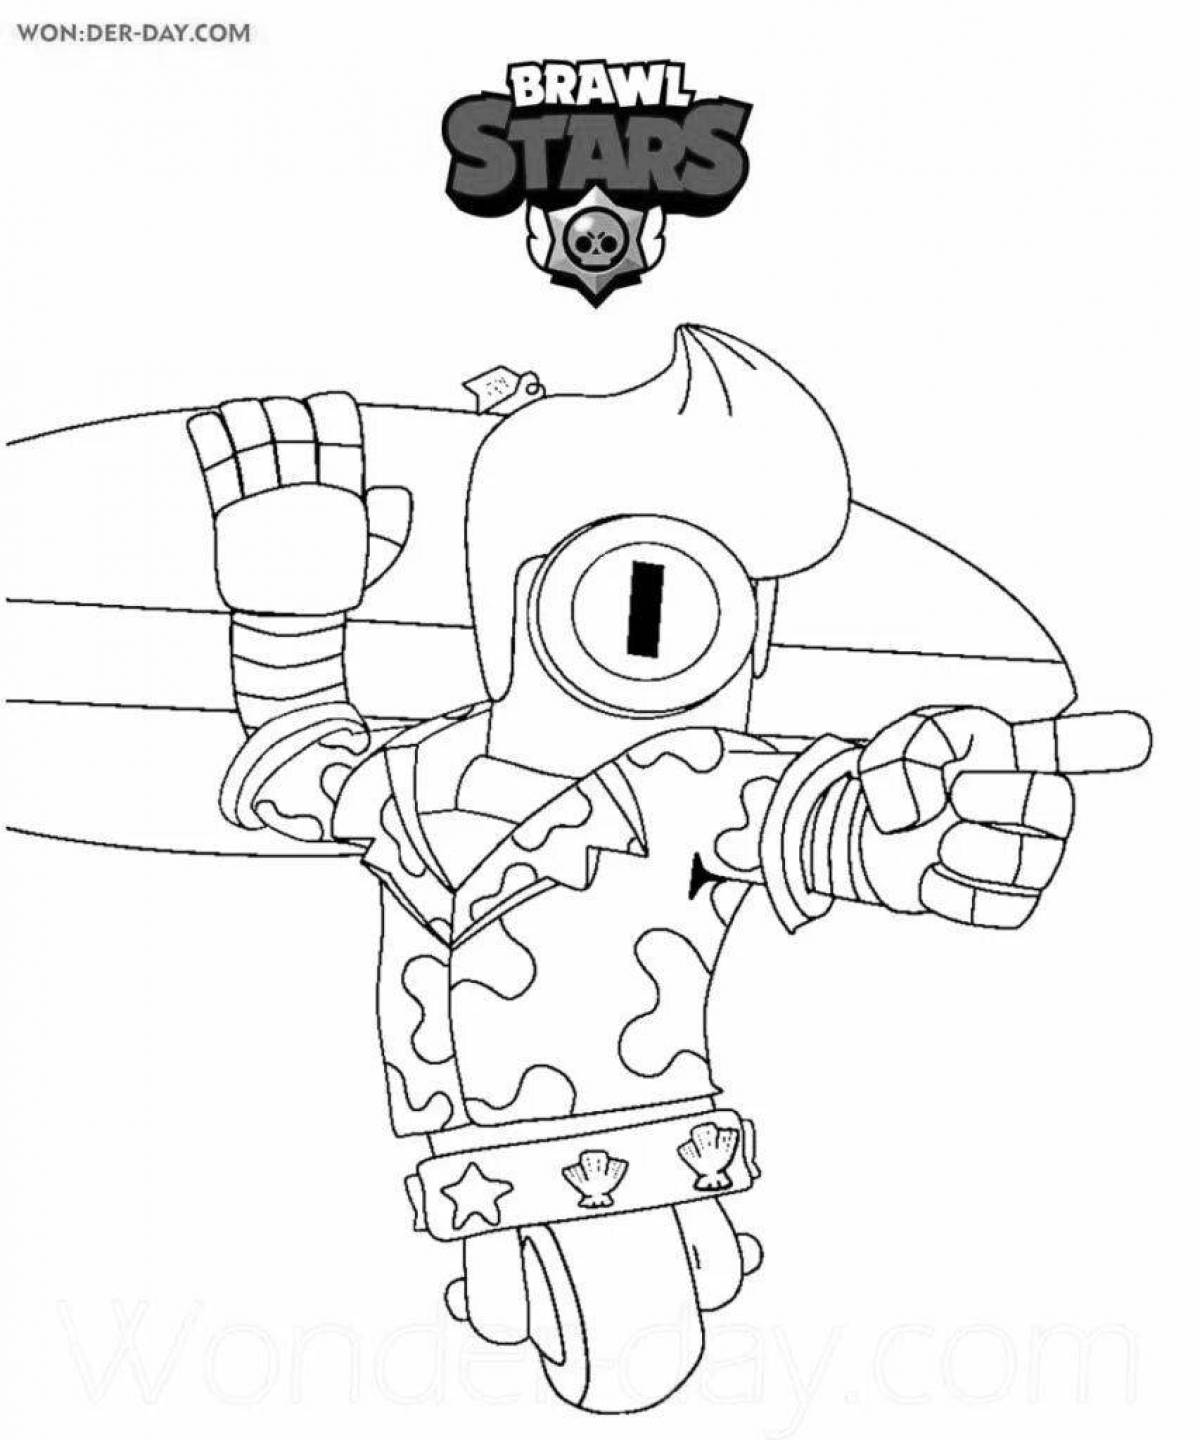 Amazing brawl stars skin coloring pages